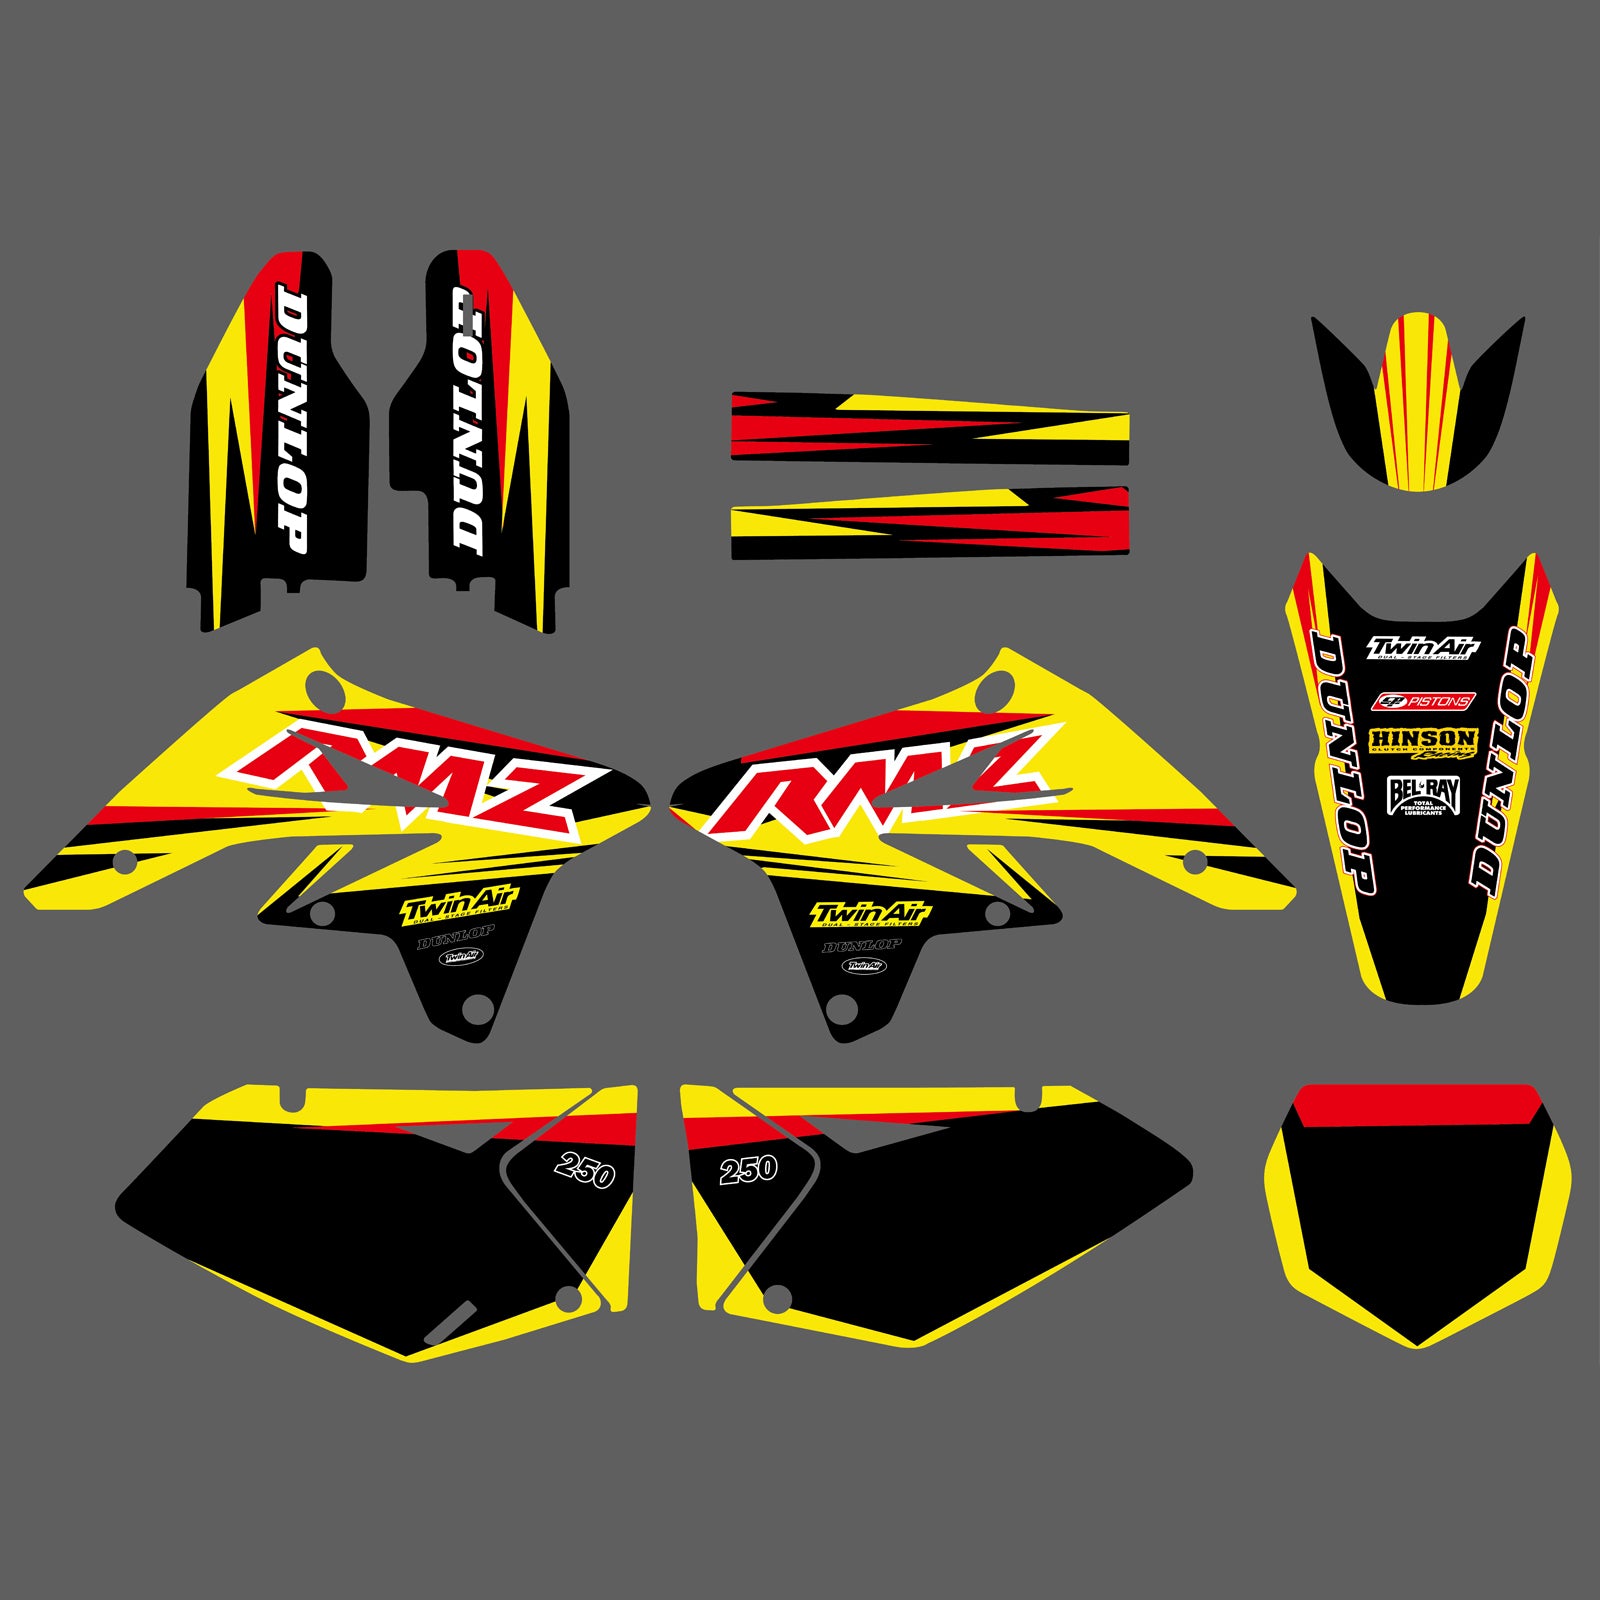 Motorcycle Graphics Backgrounds Decals Stickers for Suzuki RMZ250 07-09